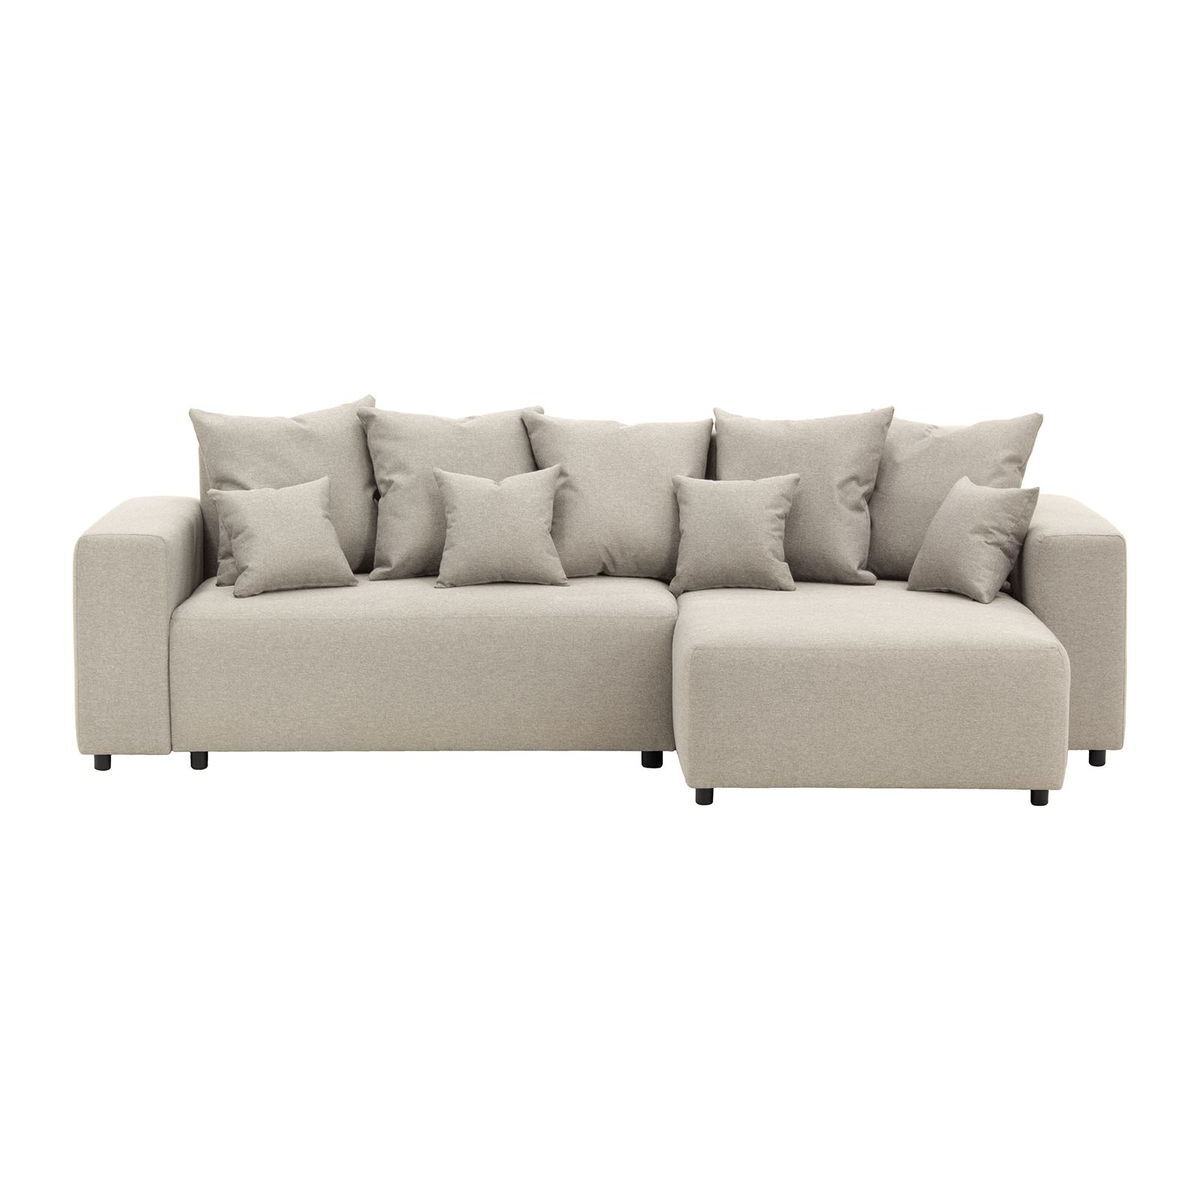 Homely Right Hand Corner Sofa Bed, boucle brown - image 1